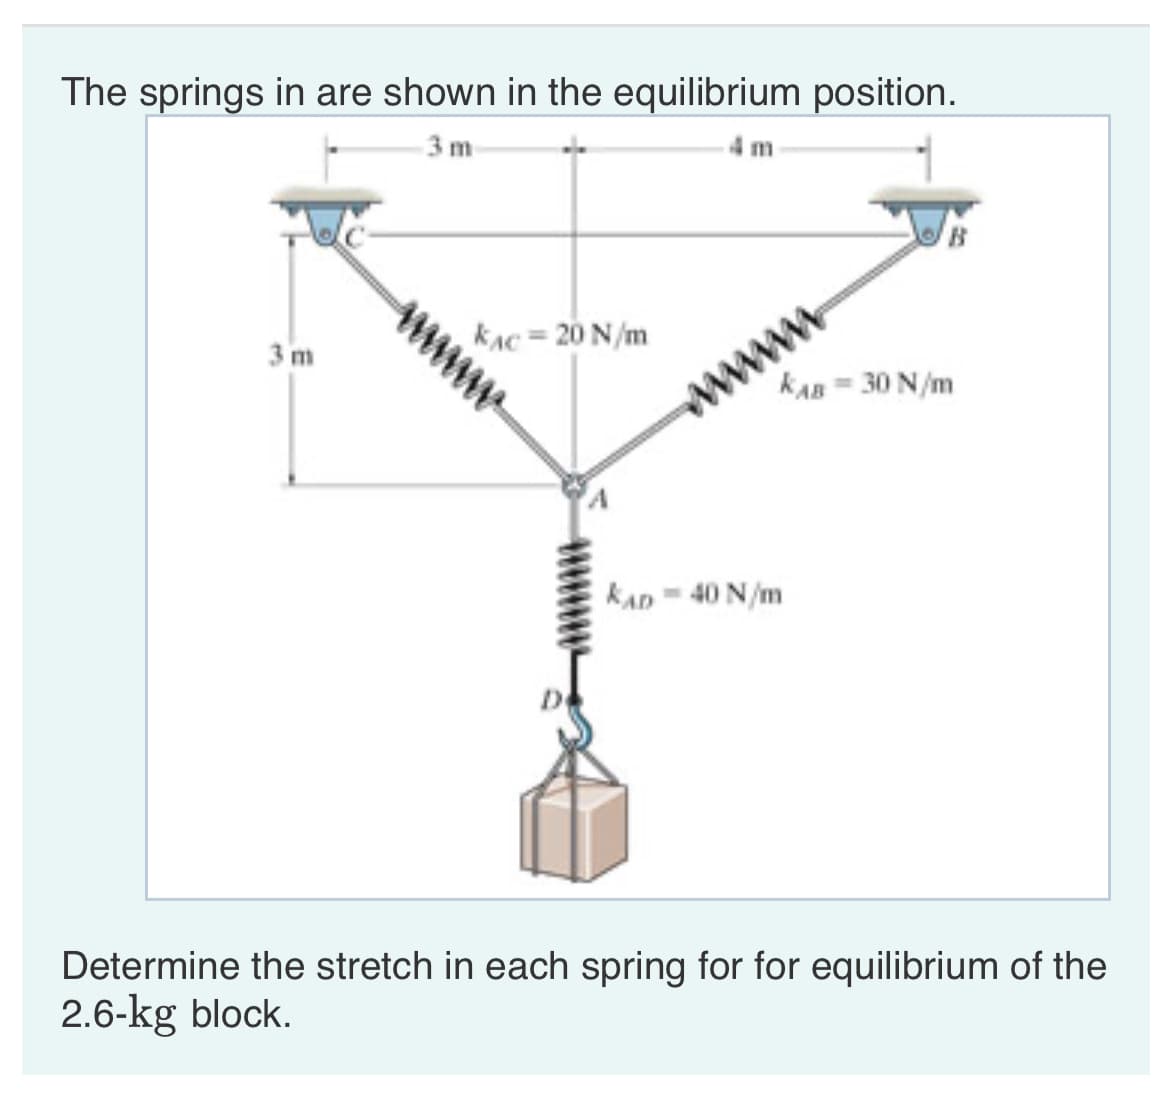 The springs in are shown in the equilibrium position.
3 m
3 m
KAC = 20 N/m
KAB = 30 N/m
wwww
KAD-40 N/m
Determine the stretch in each spring for for equilibrium of the
2.6-kg block.